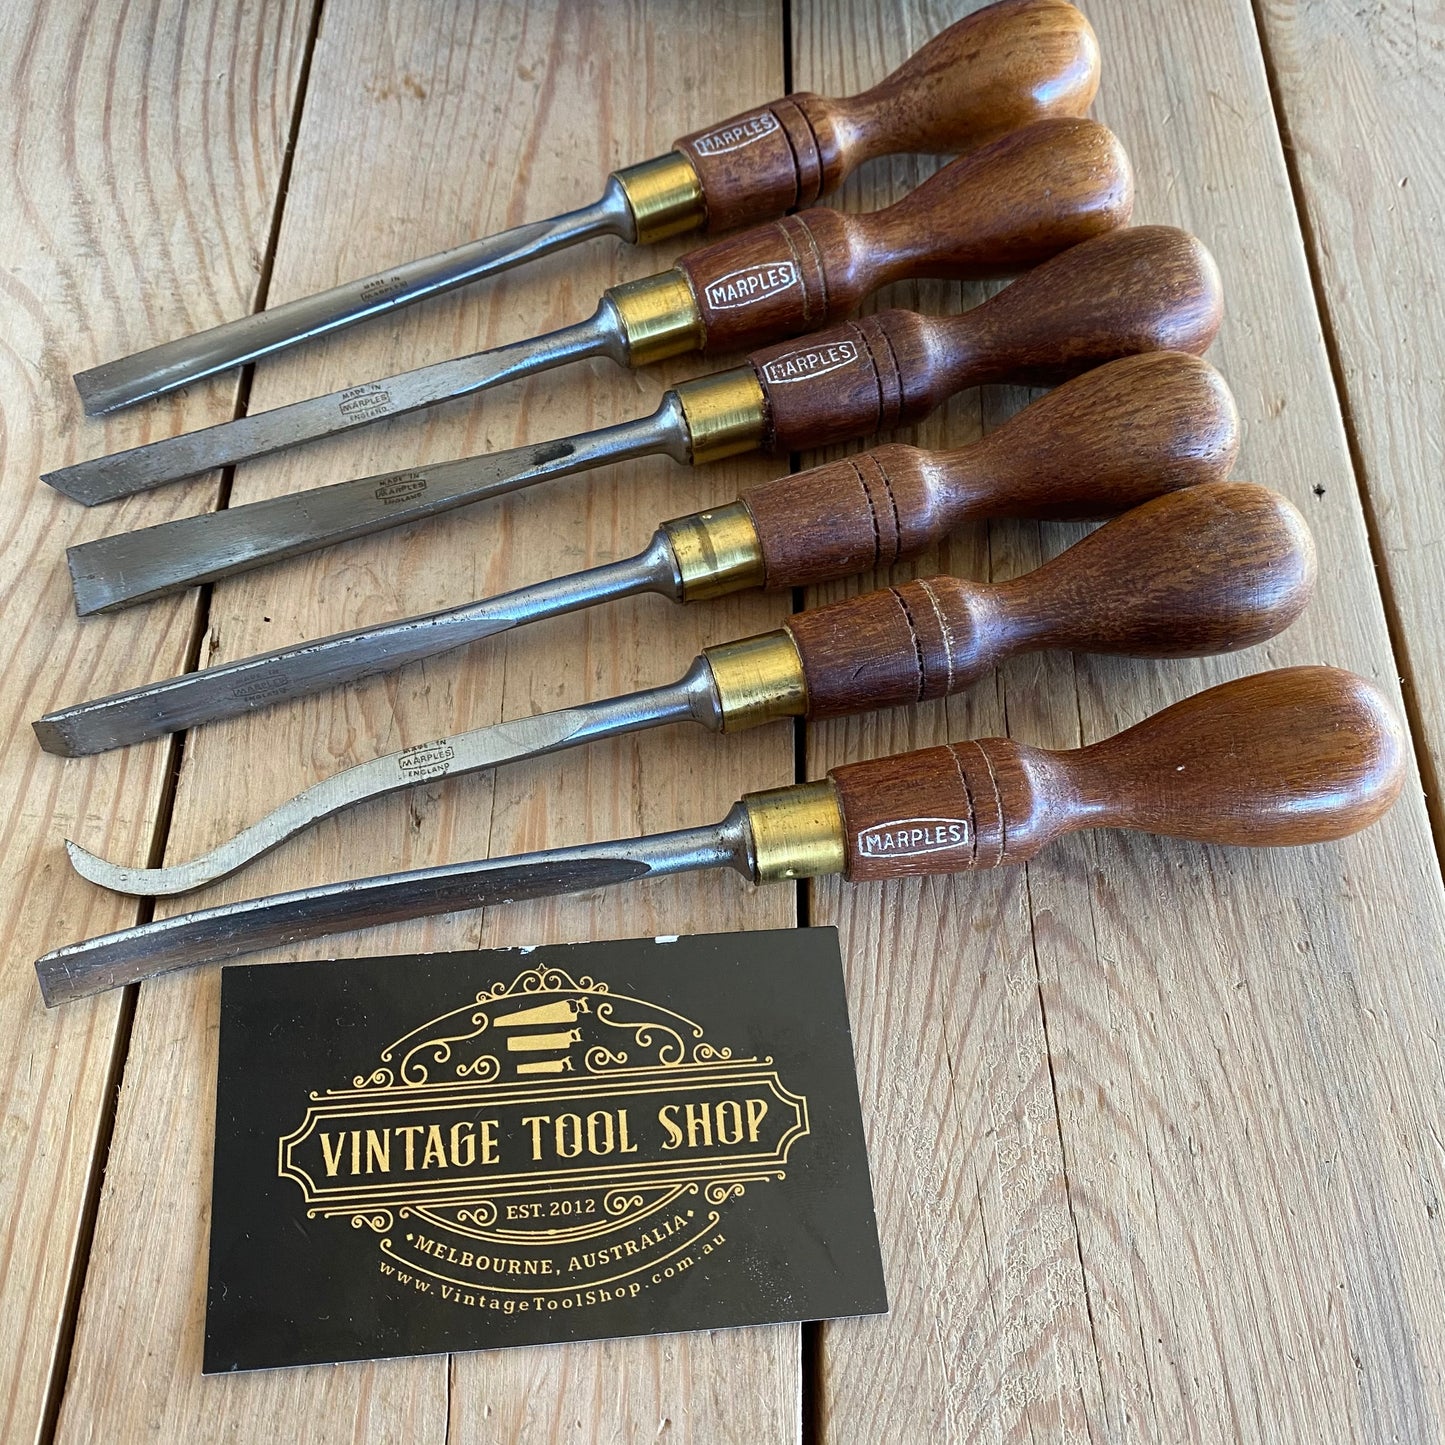 SOLD Vintage set of 6 RECORD MARPLES England Carving CHISELS No:152 unused in box T7817